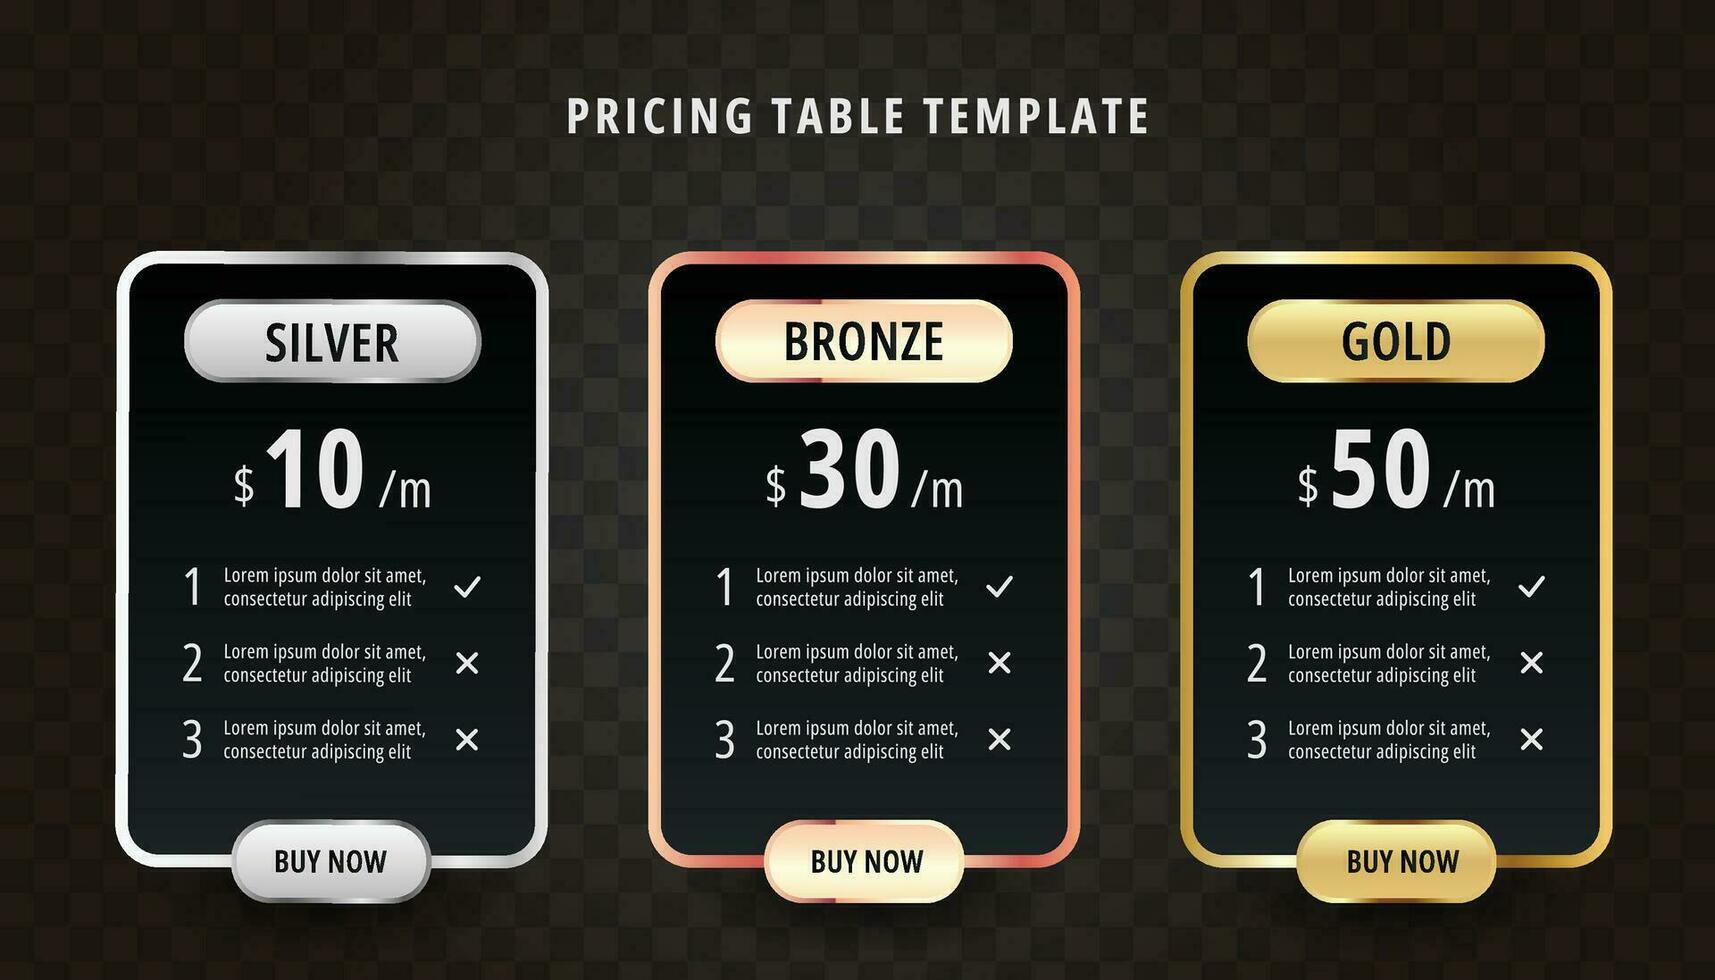 Comparison table of subscription option pricing plans infographic design template vector